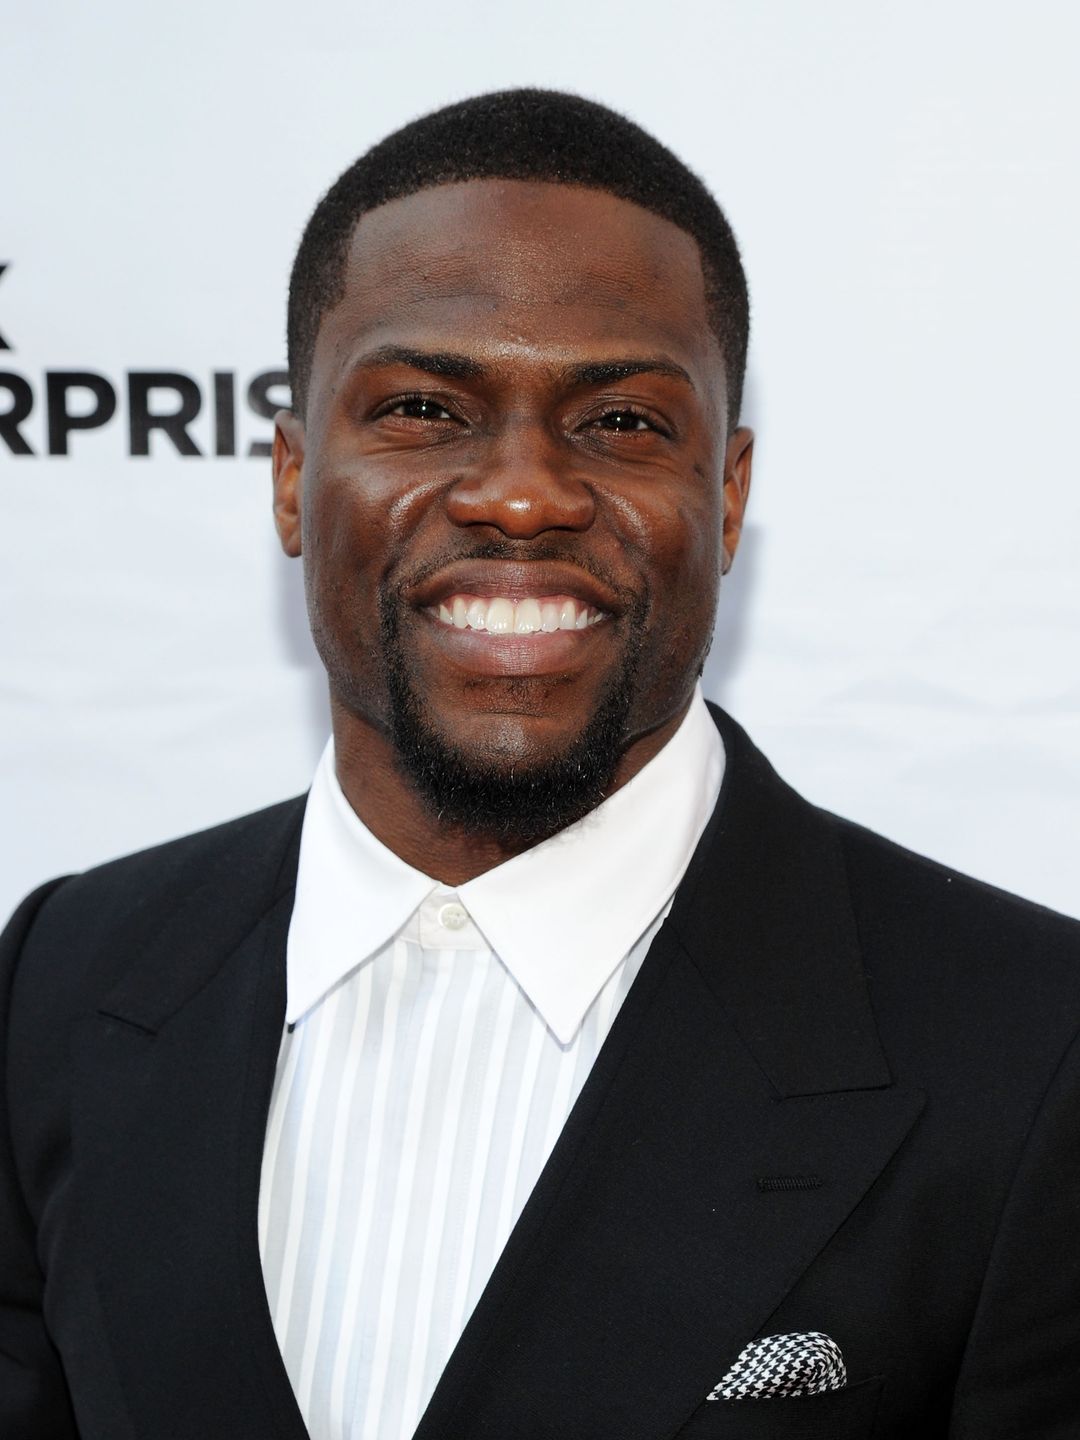 Kevin Hart story of success